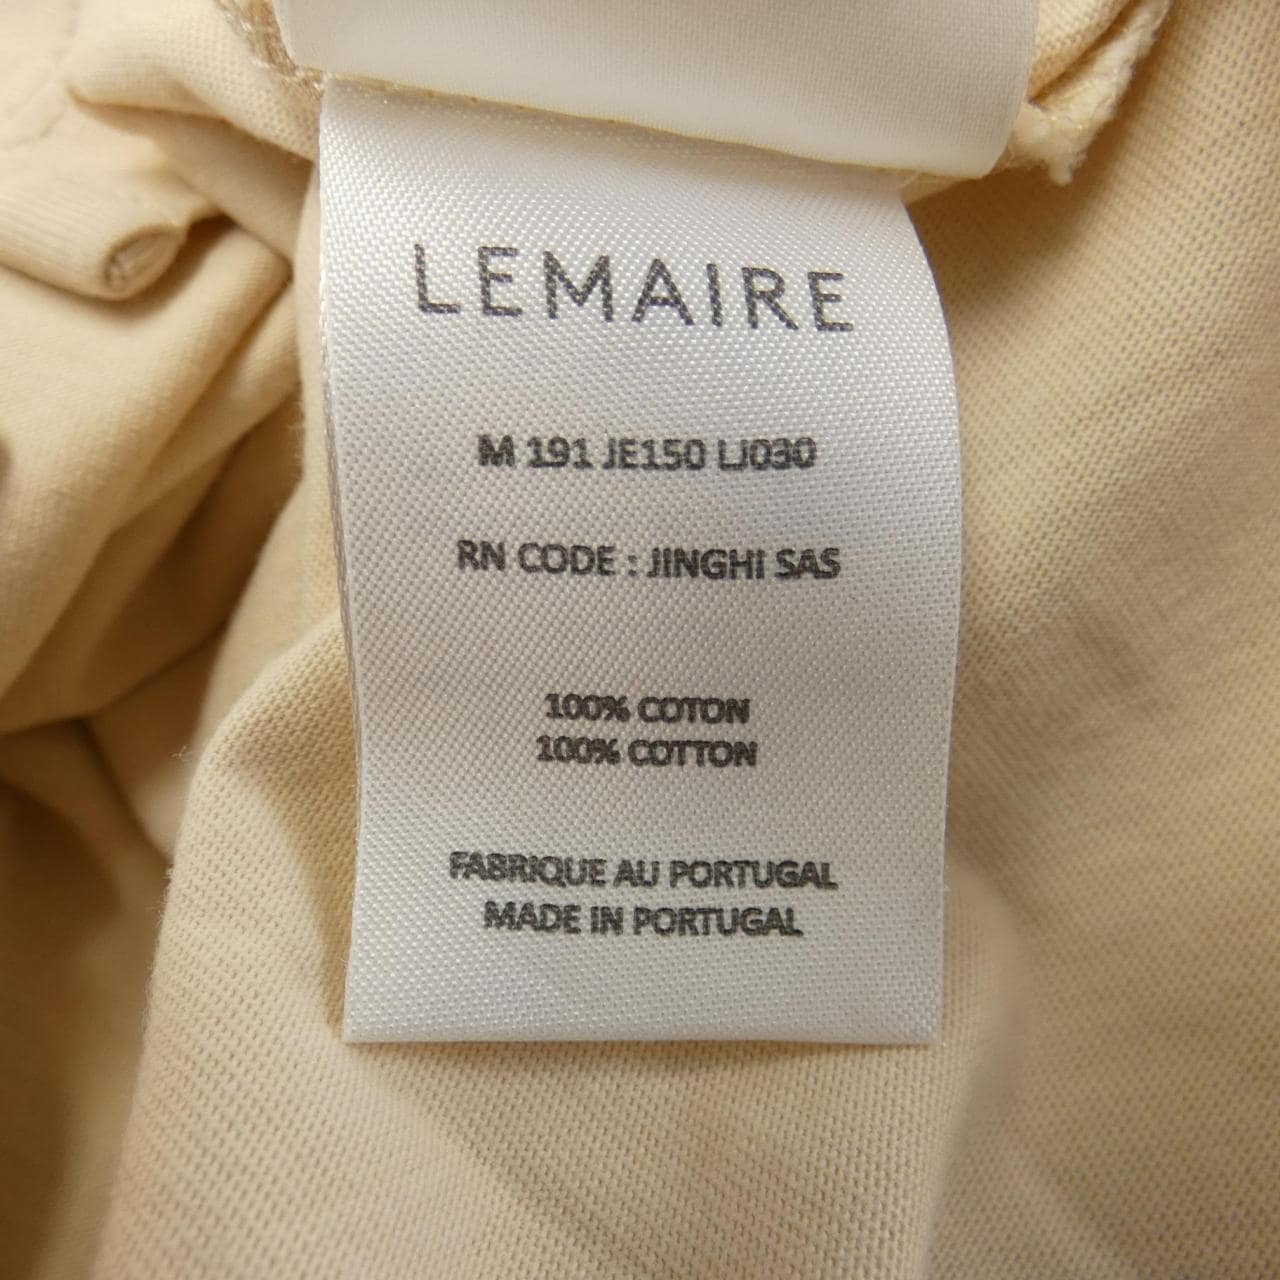 LEMAIRE POLO衫